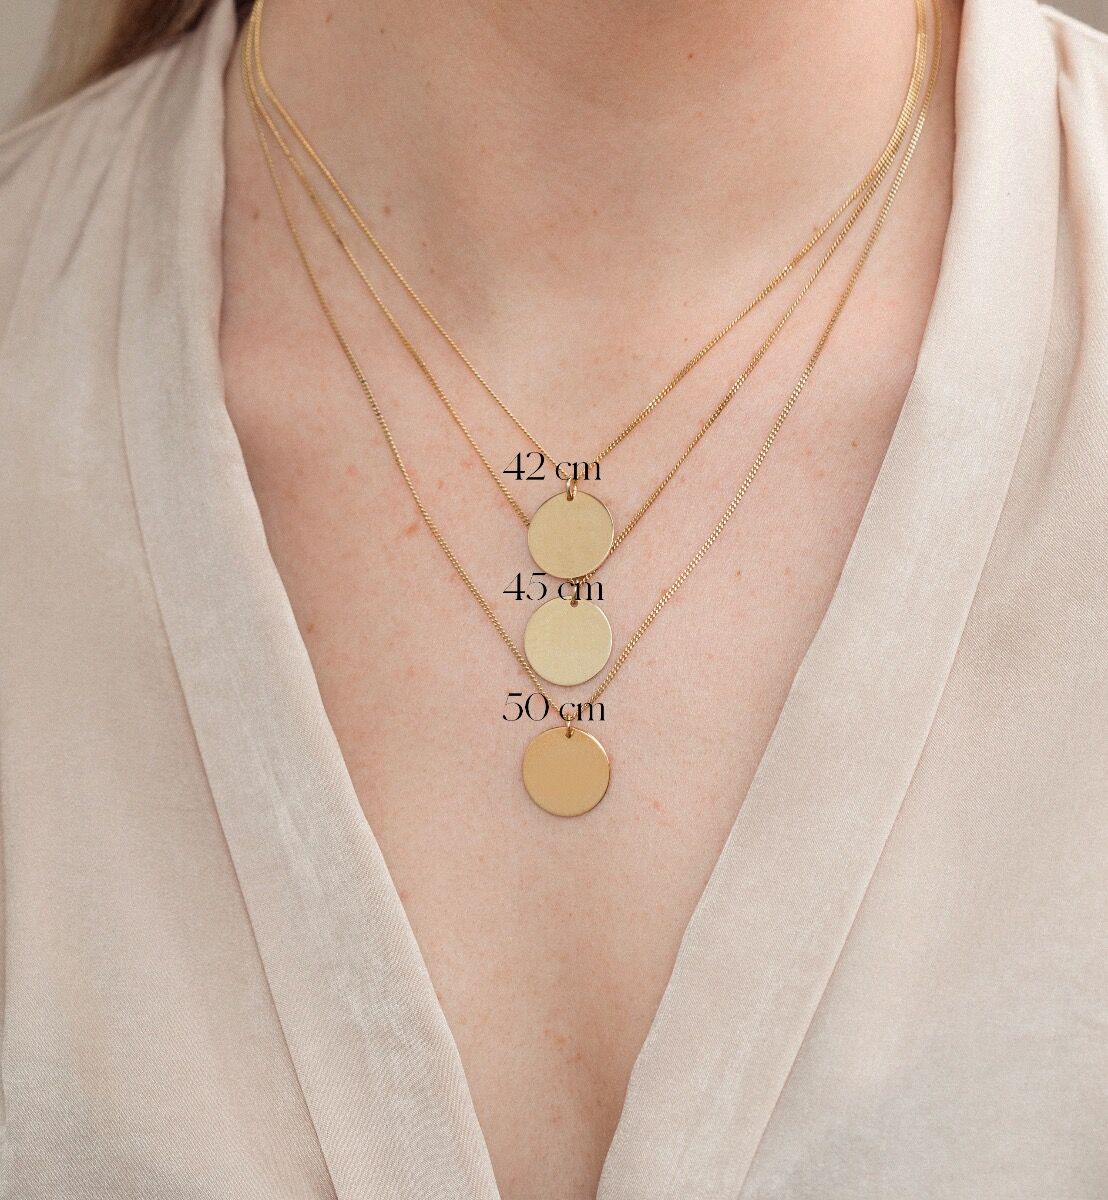 Signature Coin Necklace